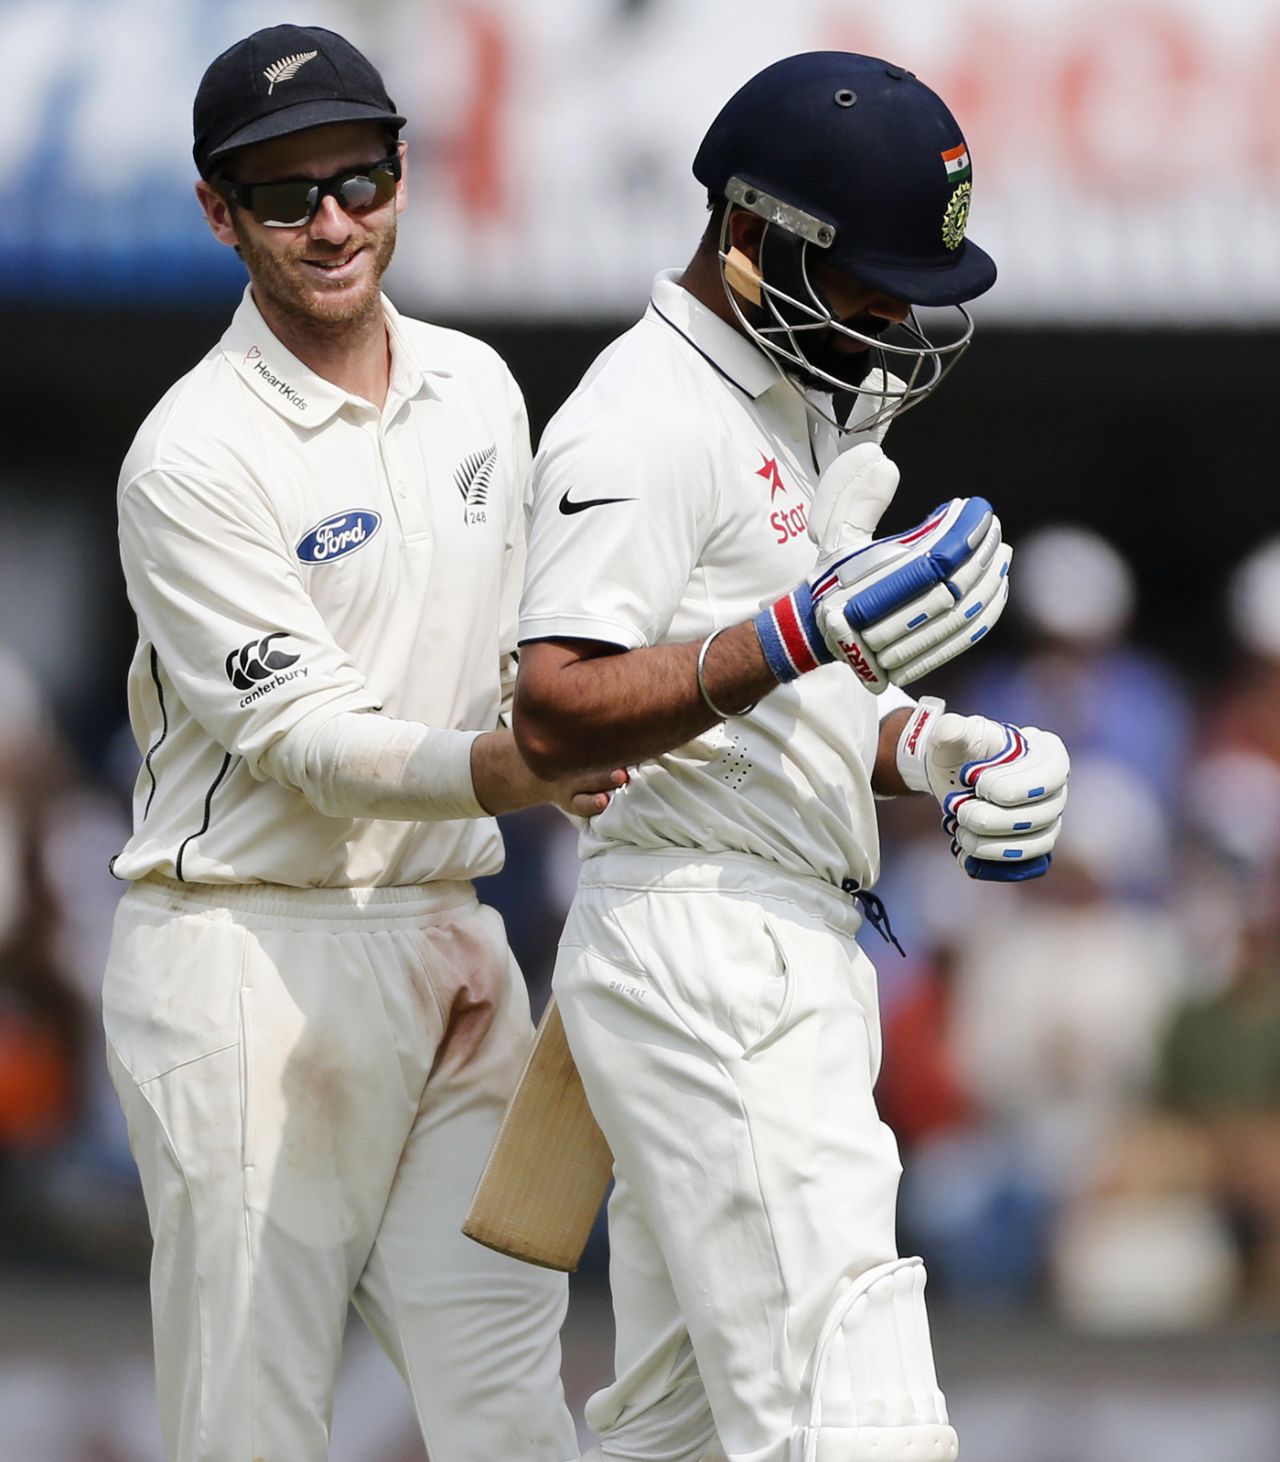 Kane Williamson congratulates Virat Kohli on his innings after his dismissal, India v New Zealand, 3rd Test, Indore, 2nd day, October 9, 2016